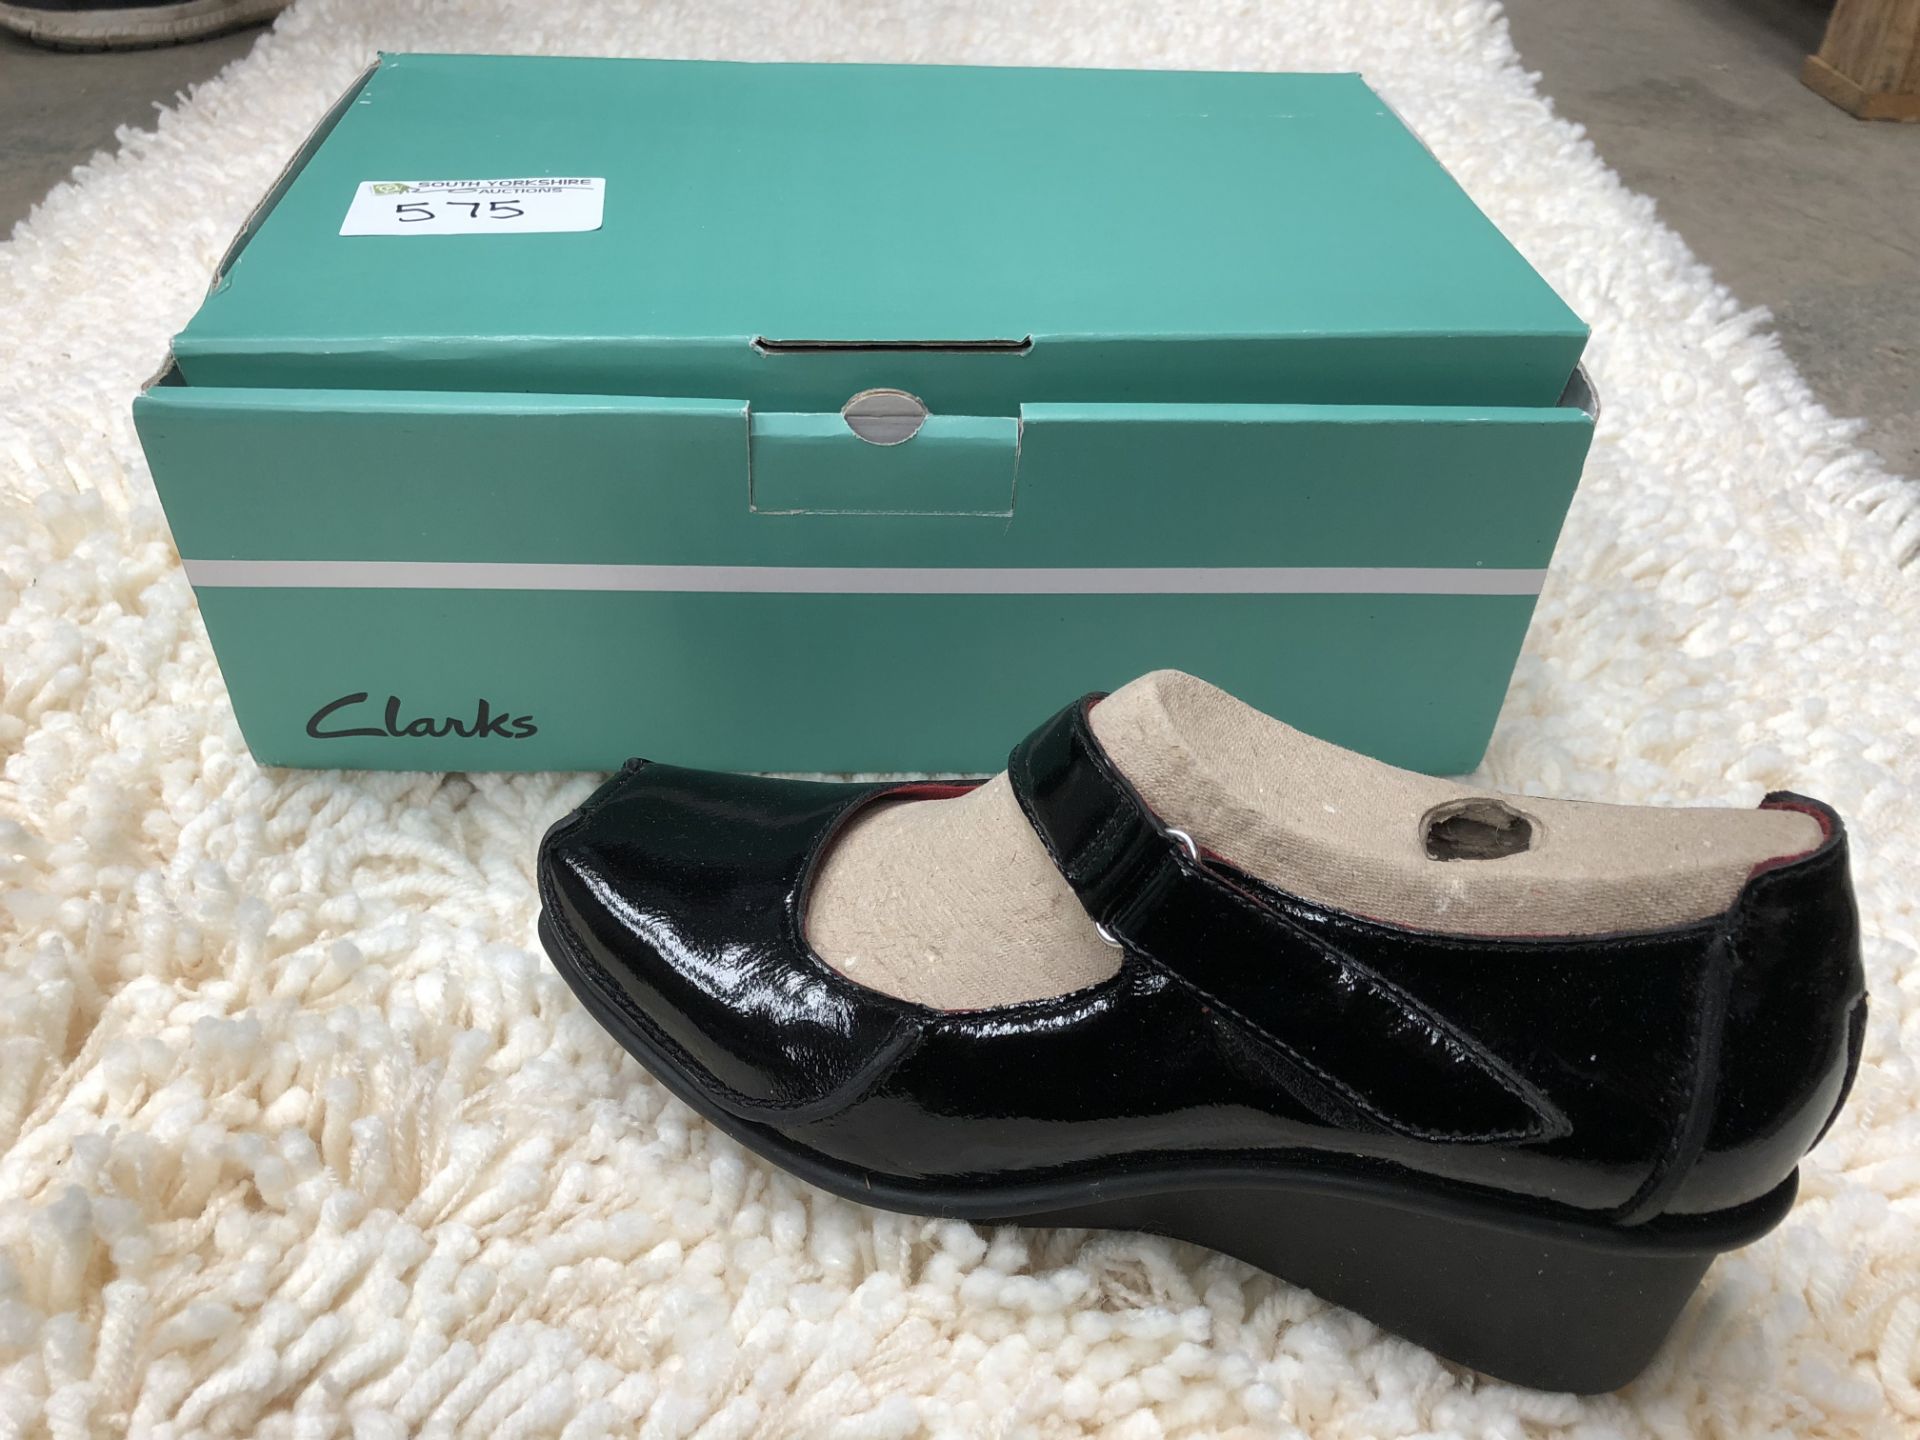 Clarkes Black Patent Heeled Shoe New and Boxed